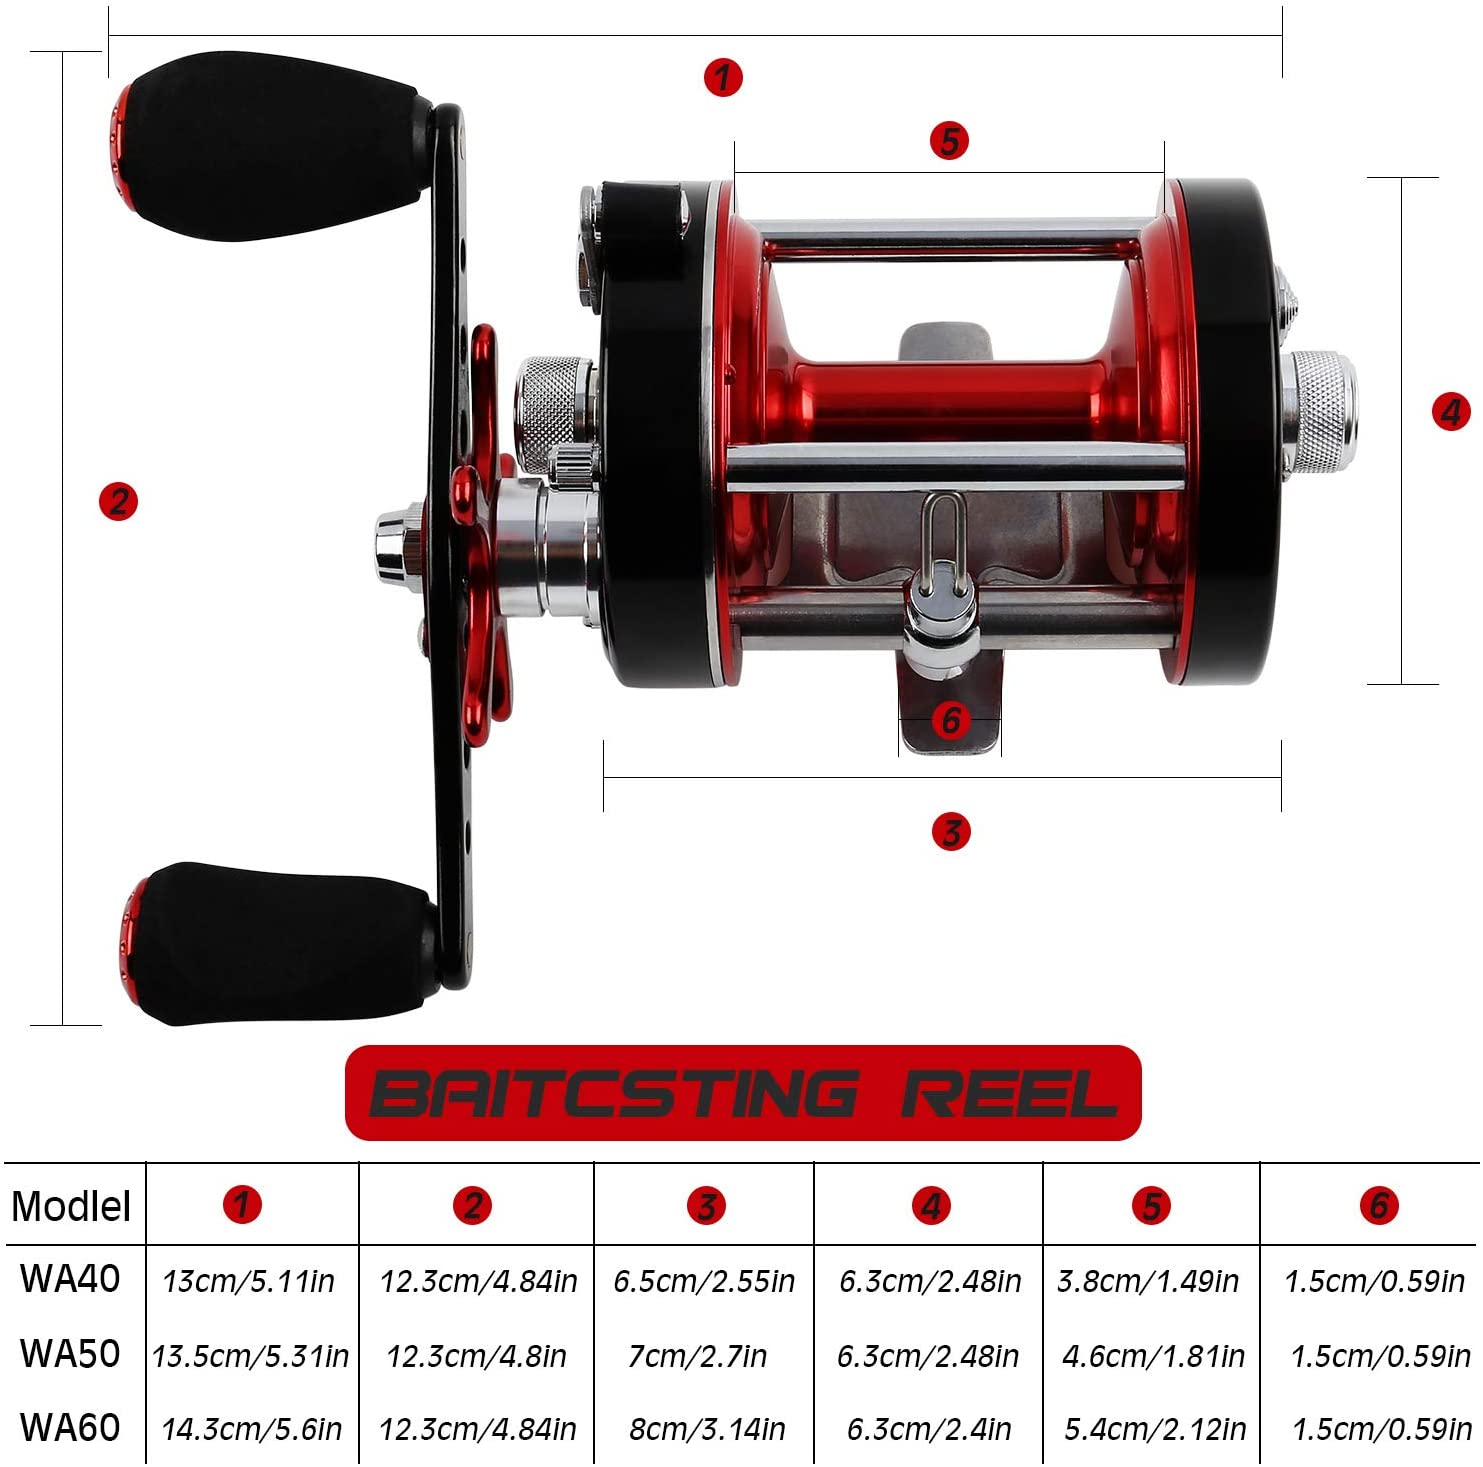 Sougayilang Round Baitcasting Reel Reinforced Metal Body EVA Left/Right Handle Conventional Fishing Reel - image 2 of 7